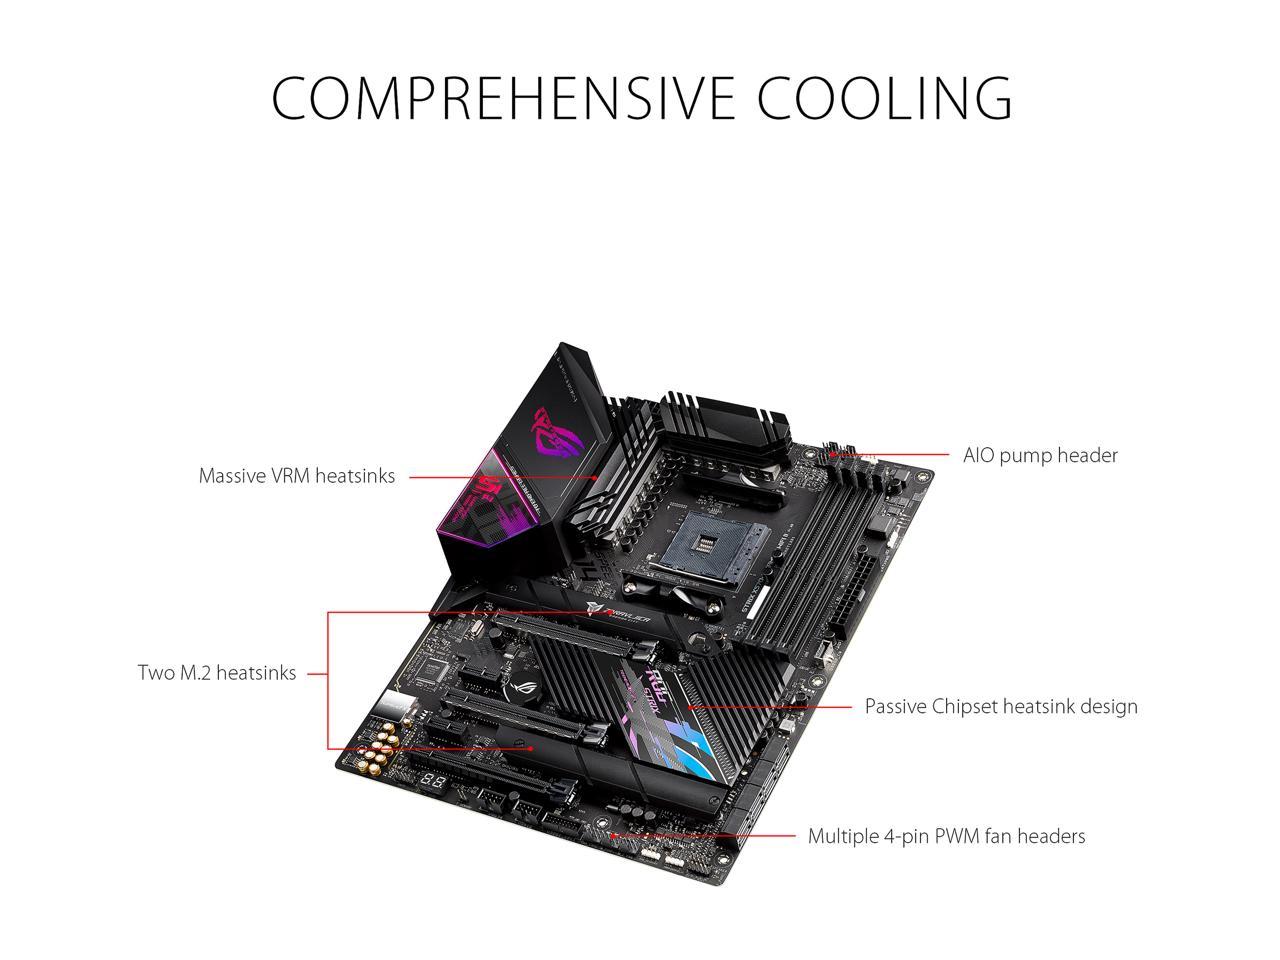 ASUS ROG Strix X570-E Gaming WIFI II AMD AM4 X570S ATX Gaming Motherboard  (PCIe 4.0, Passive PCH Heatsink, 12+4 Power Stages, WiFi 6E, 2.5 Gb LAN, 